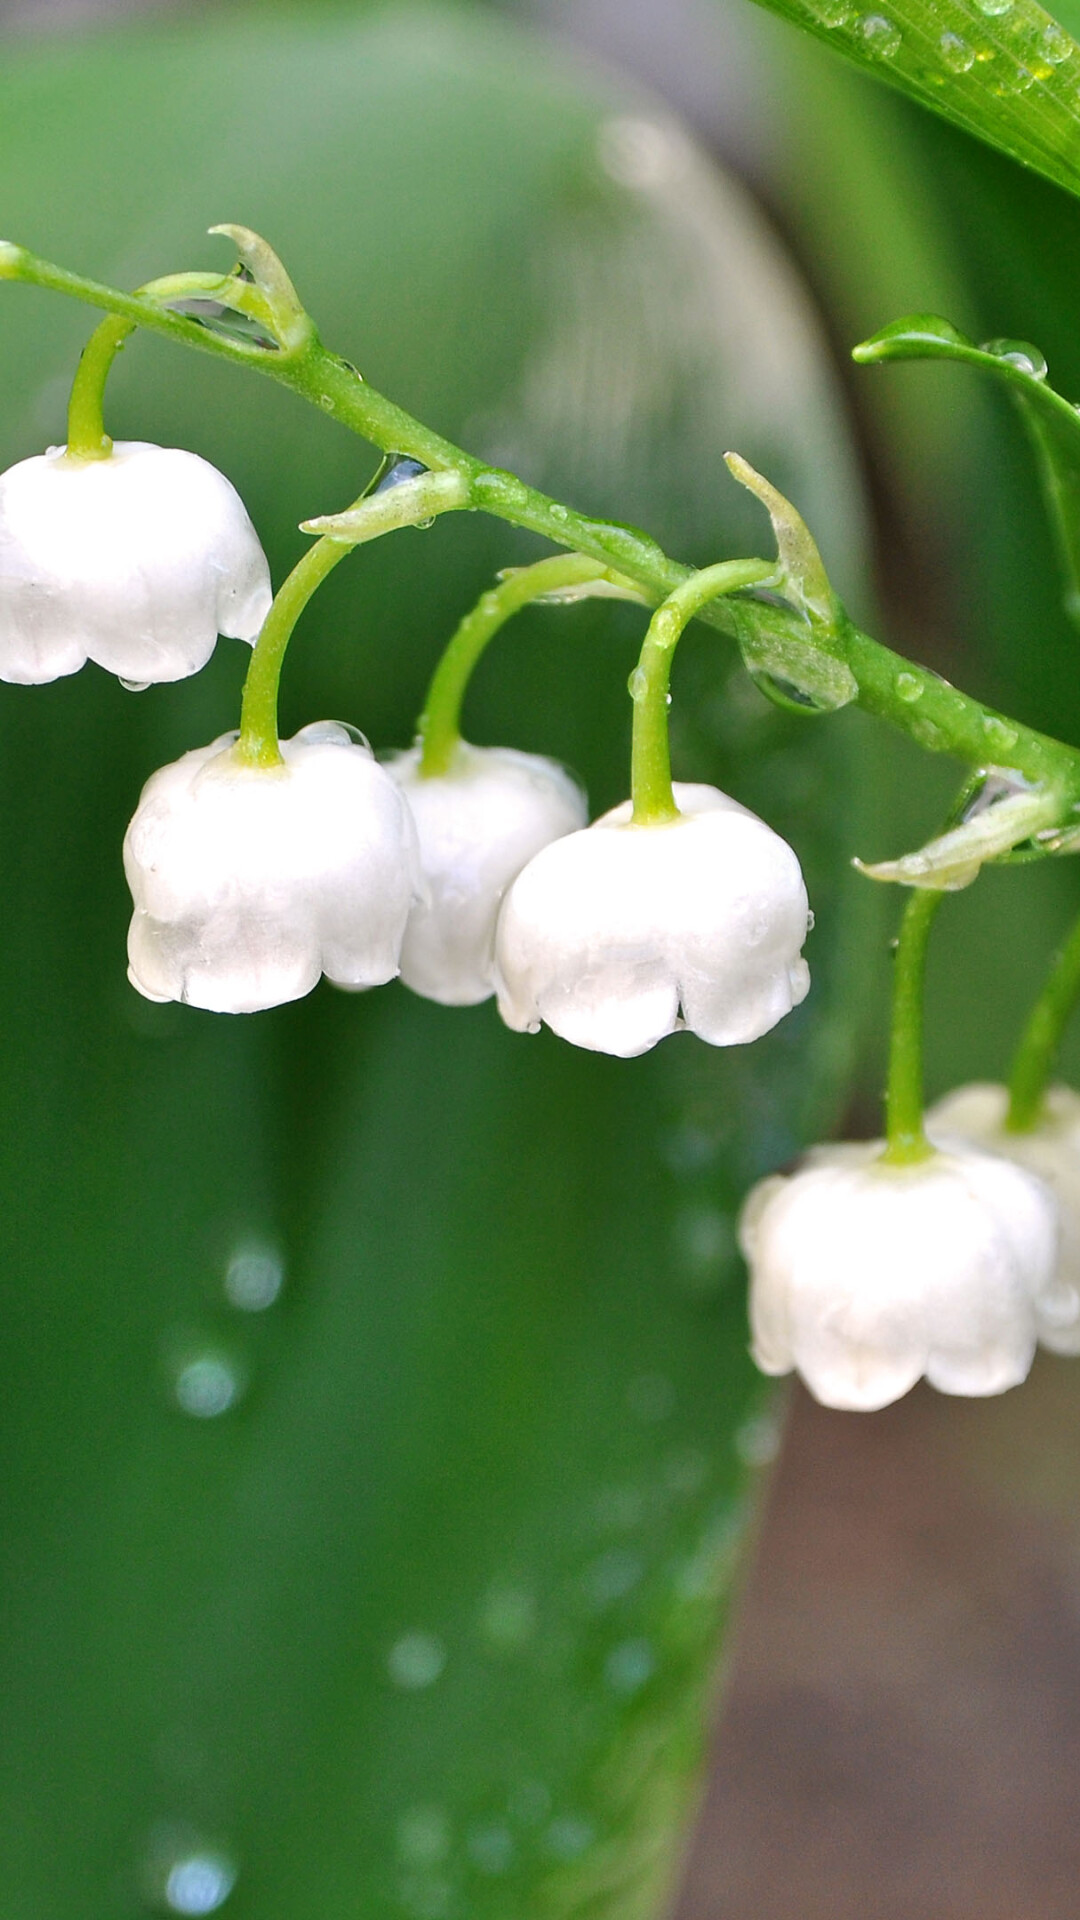 Lily of the Valley: One and only representative of the genus Convallaria. 1080x1920 Full HD Wallpaper.